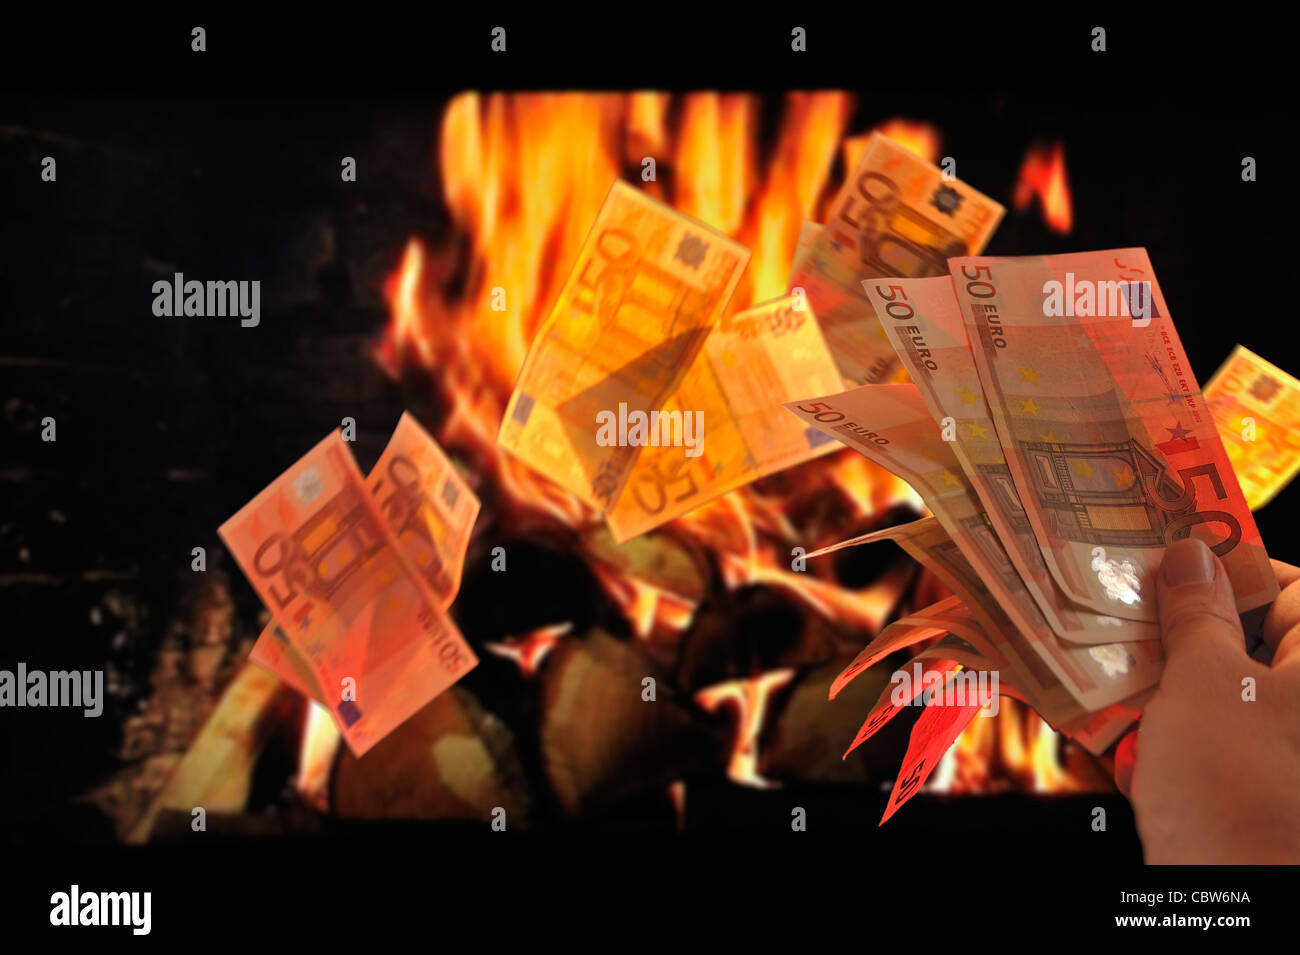 Burning European money by throwing euro bank notes in flames of fireplace to symbolize recession and crisis in the Europe zone Stock Photo